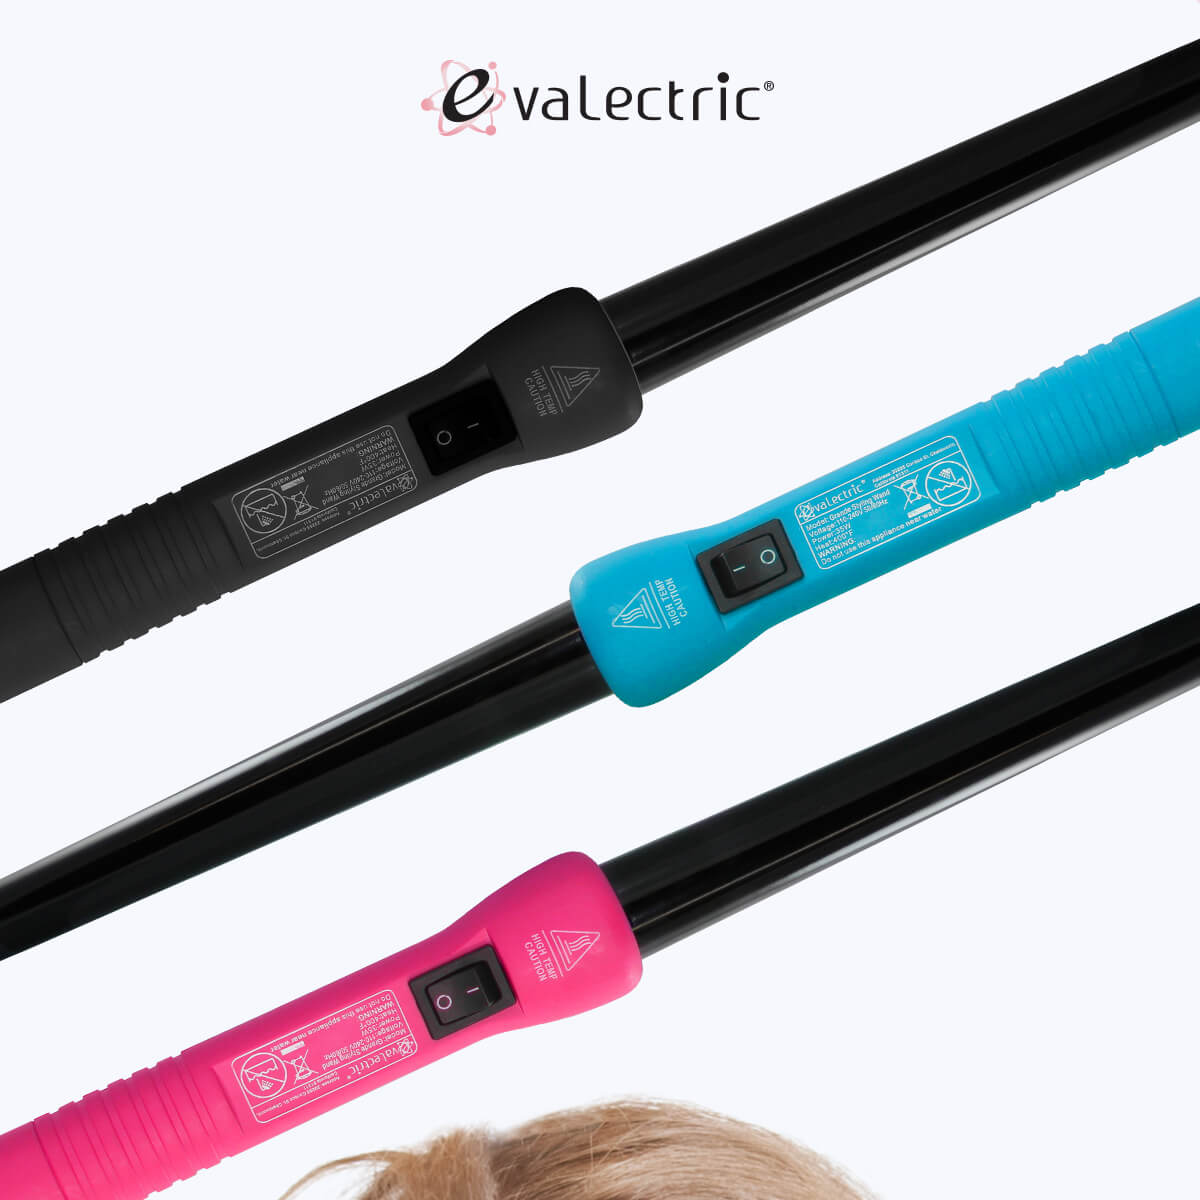 Hair curling products